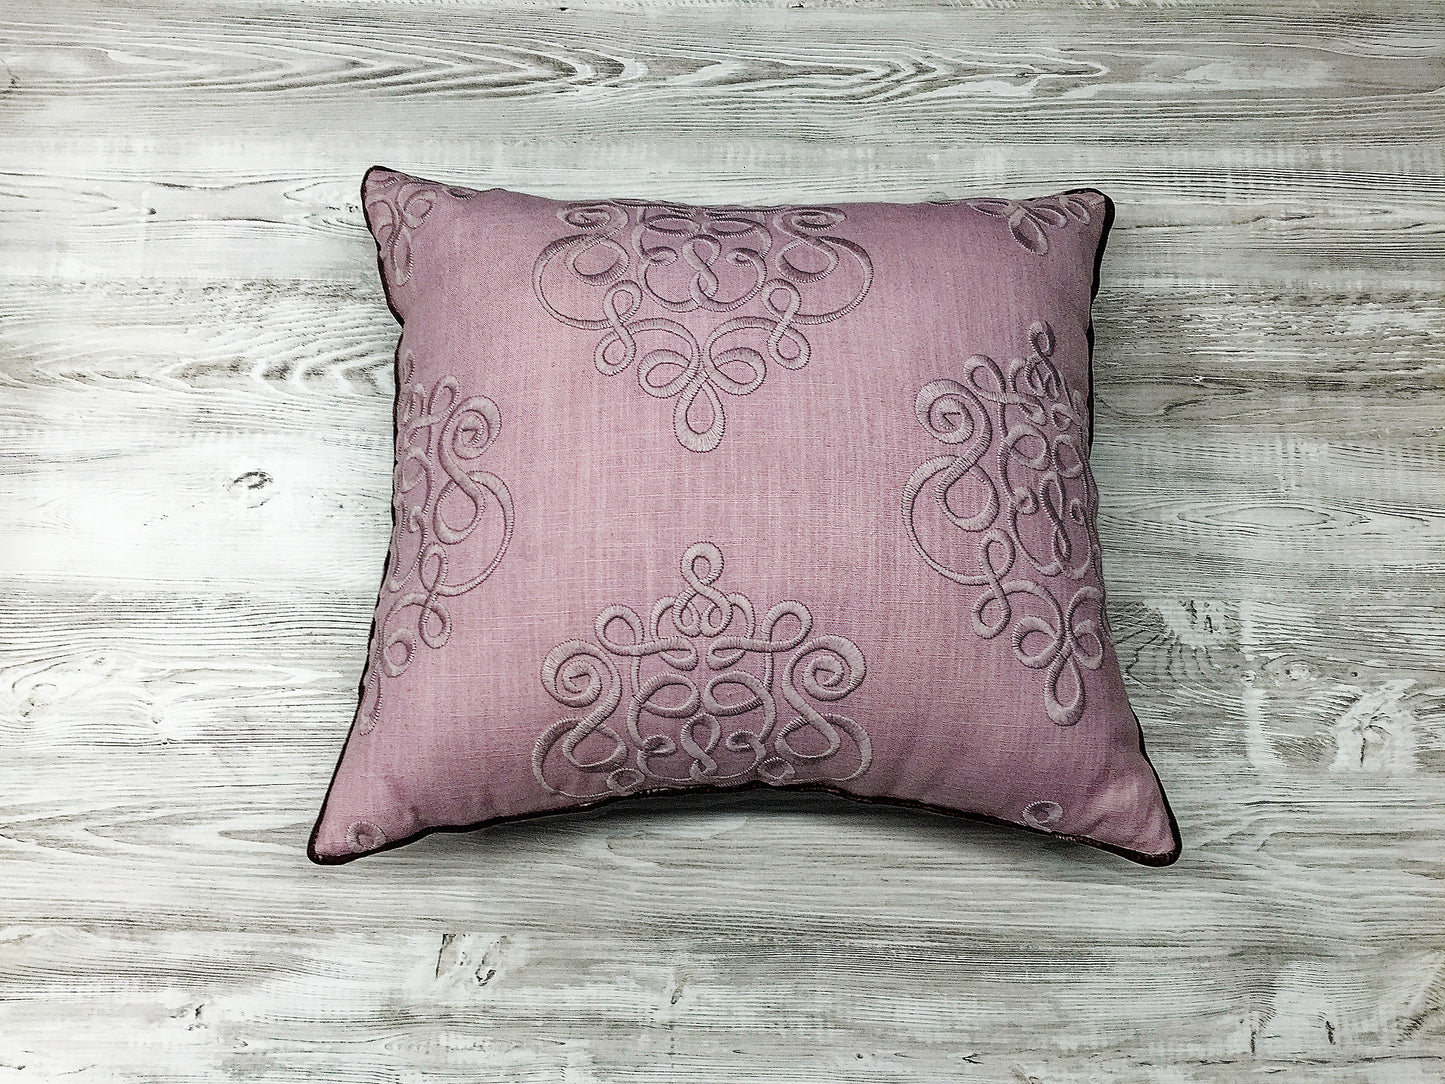 Luxury cushion "Exquisiteness and Soul"